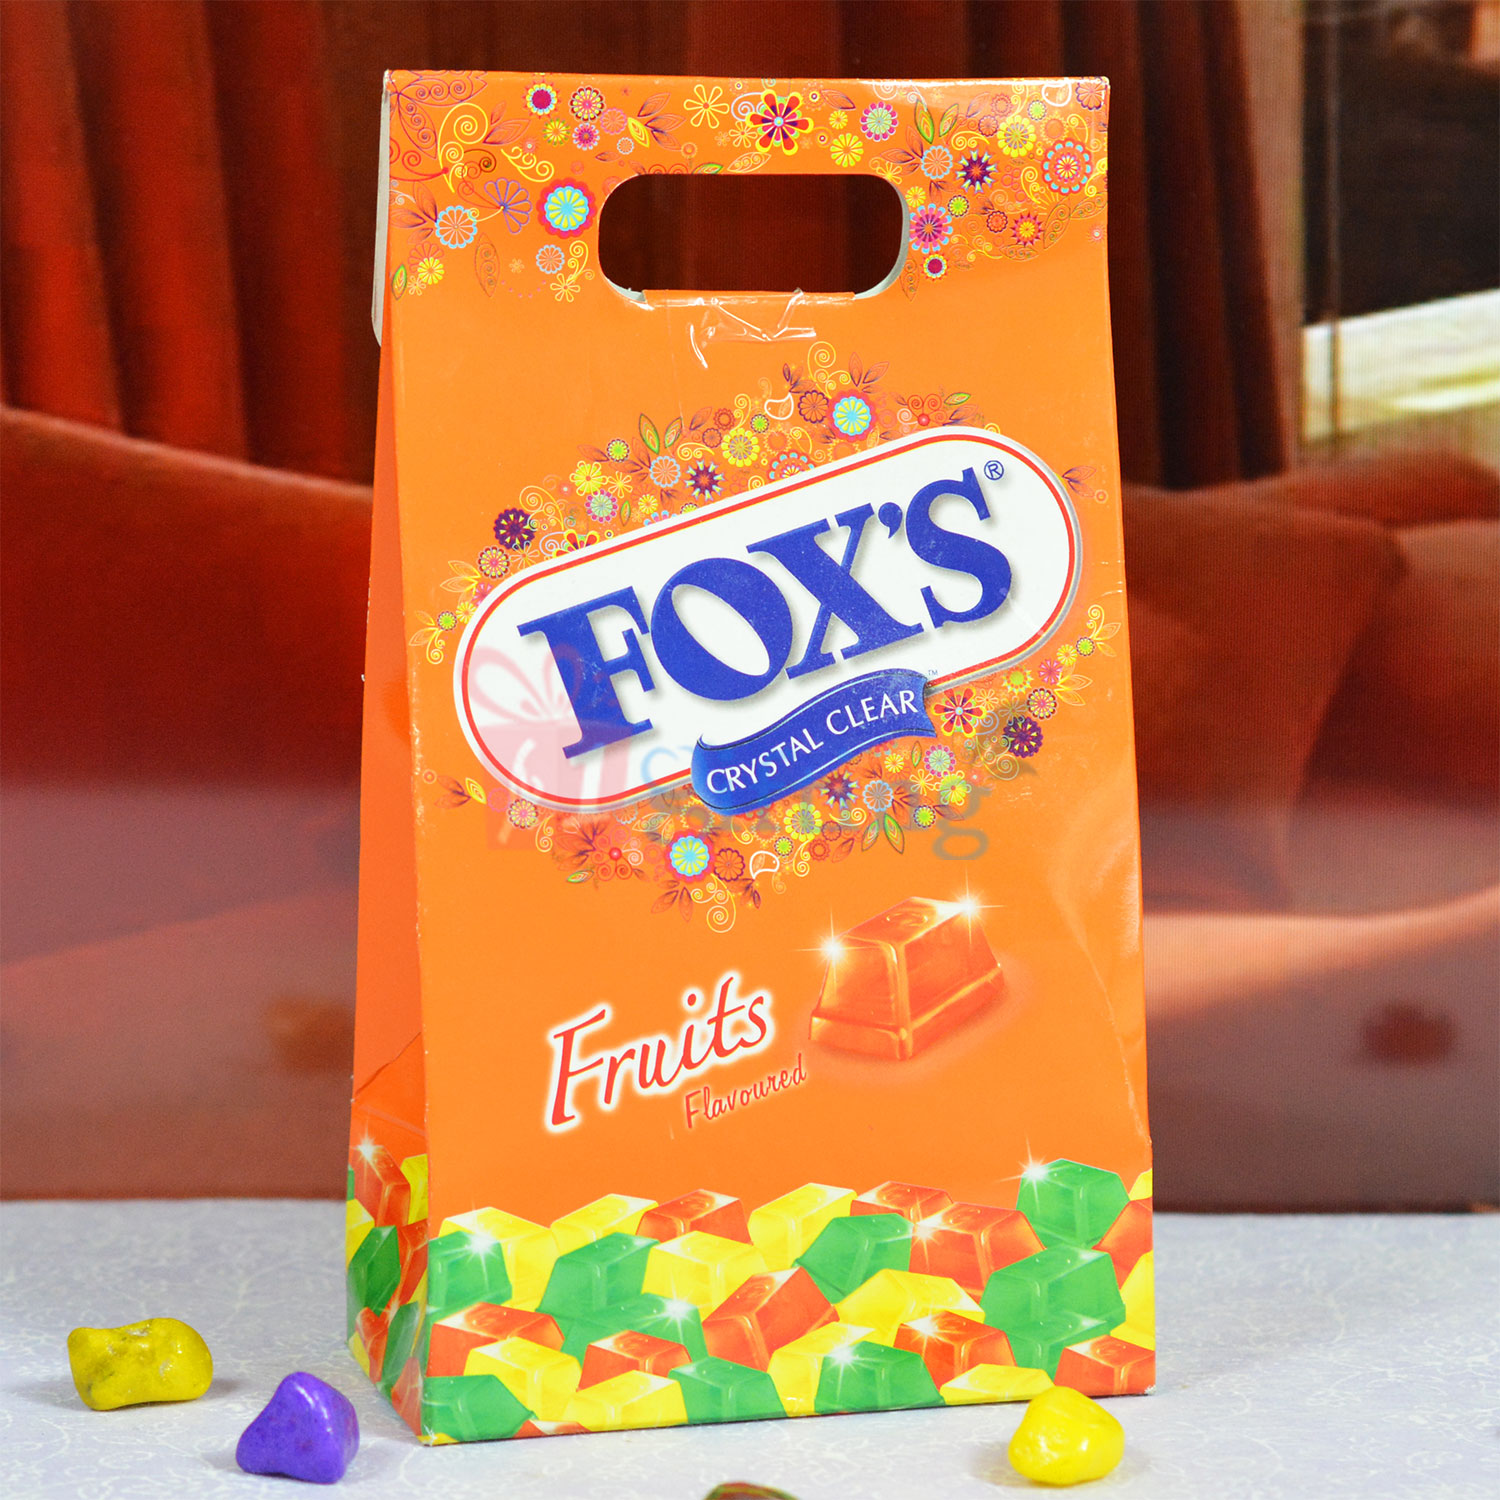 Foxs Crystal Clear Fruits Flavoured